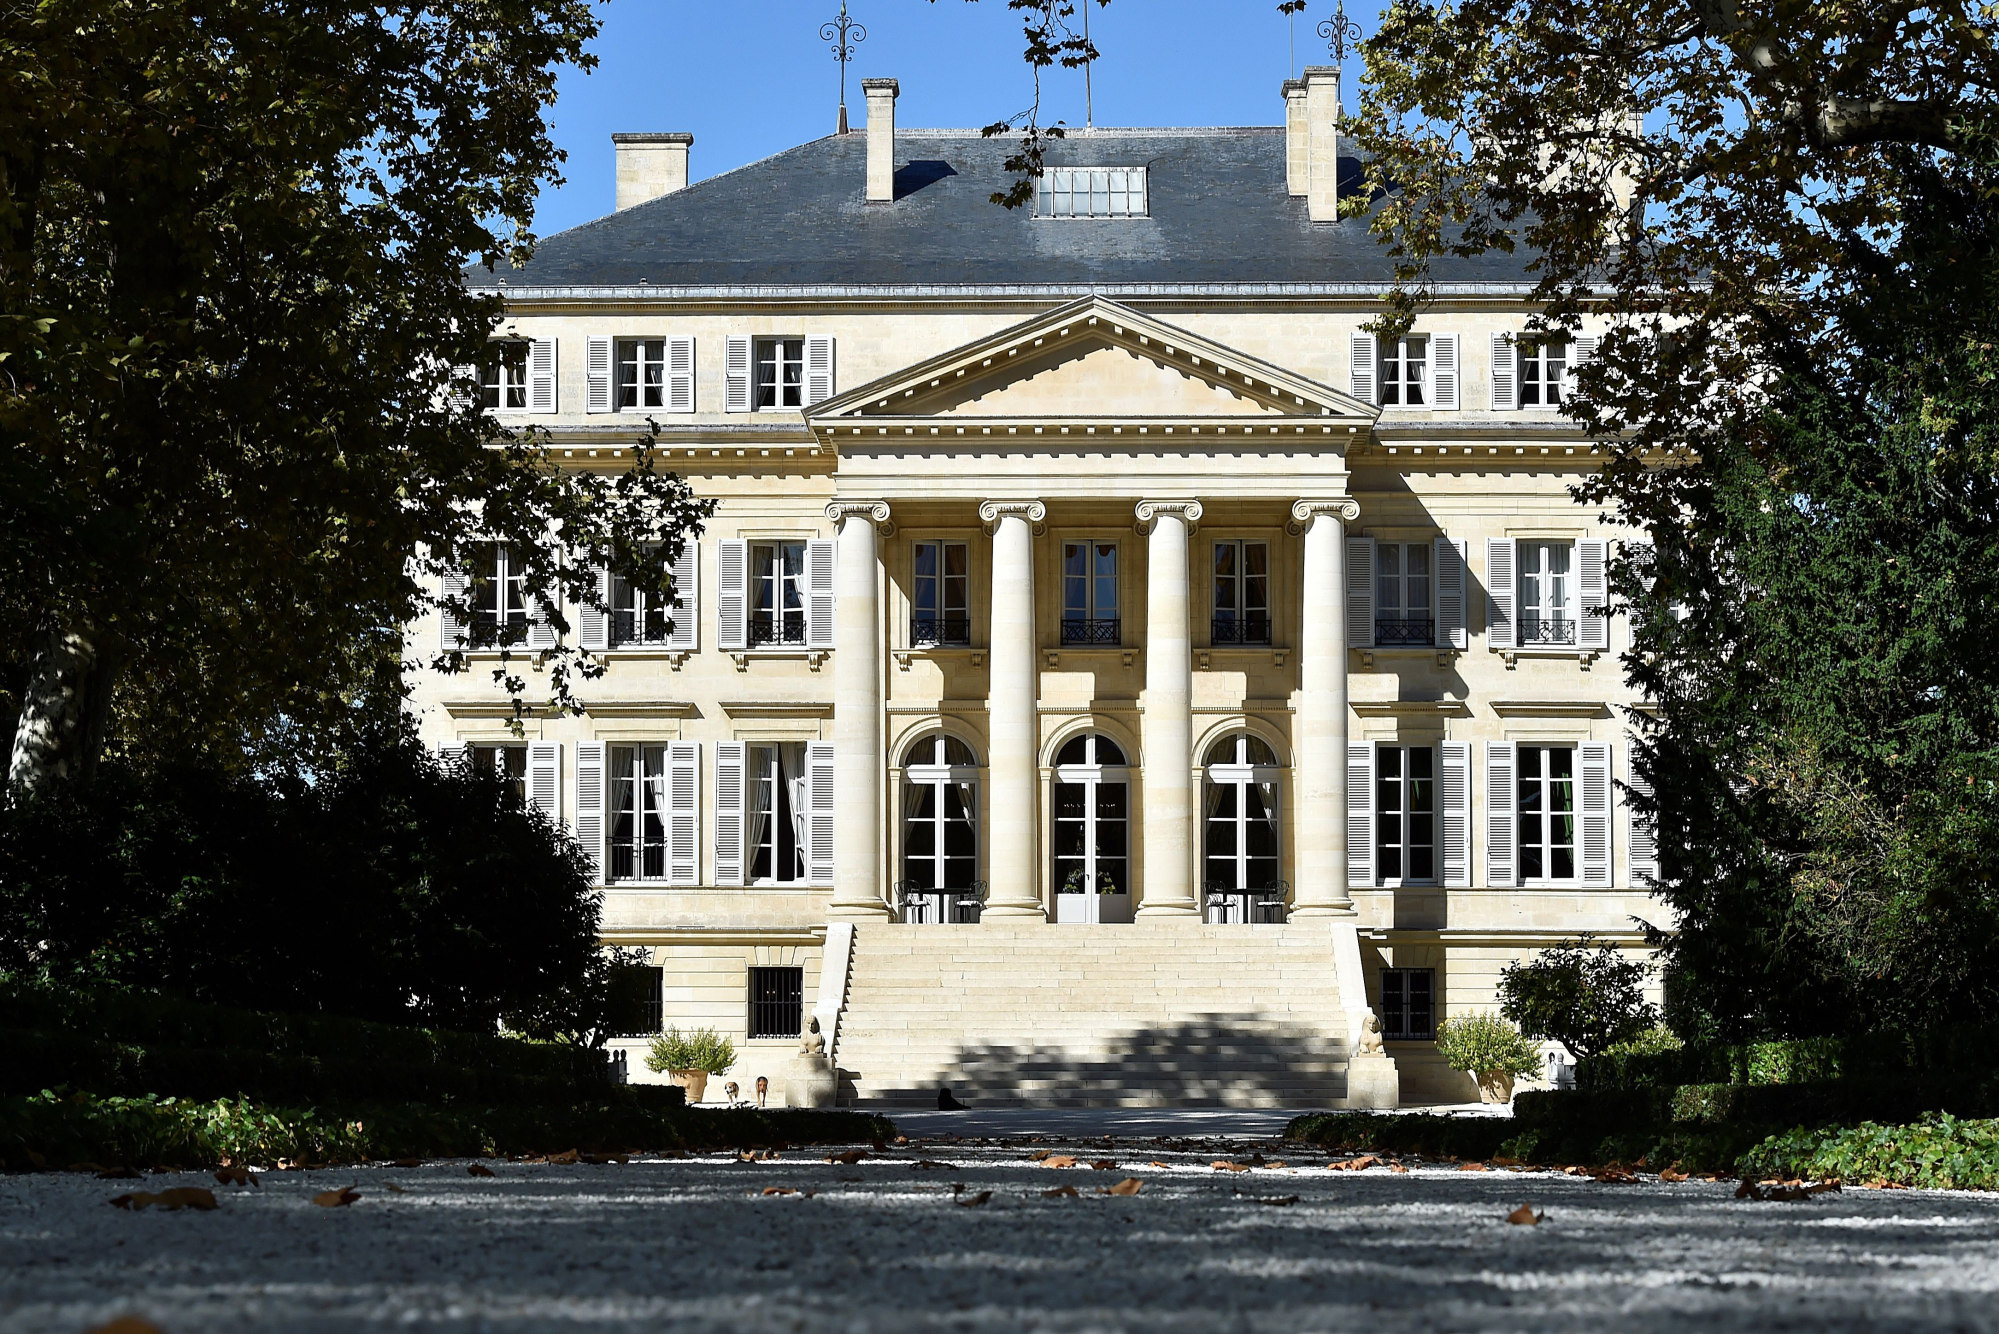 The Chateau Margaux manor house, known as the “Versailles du Medoc.”